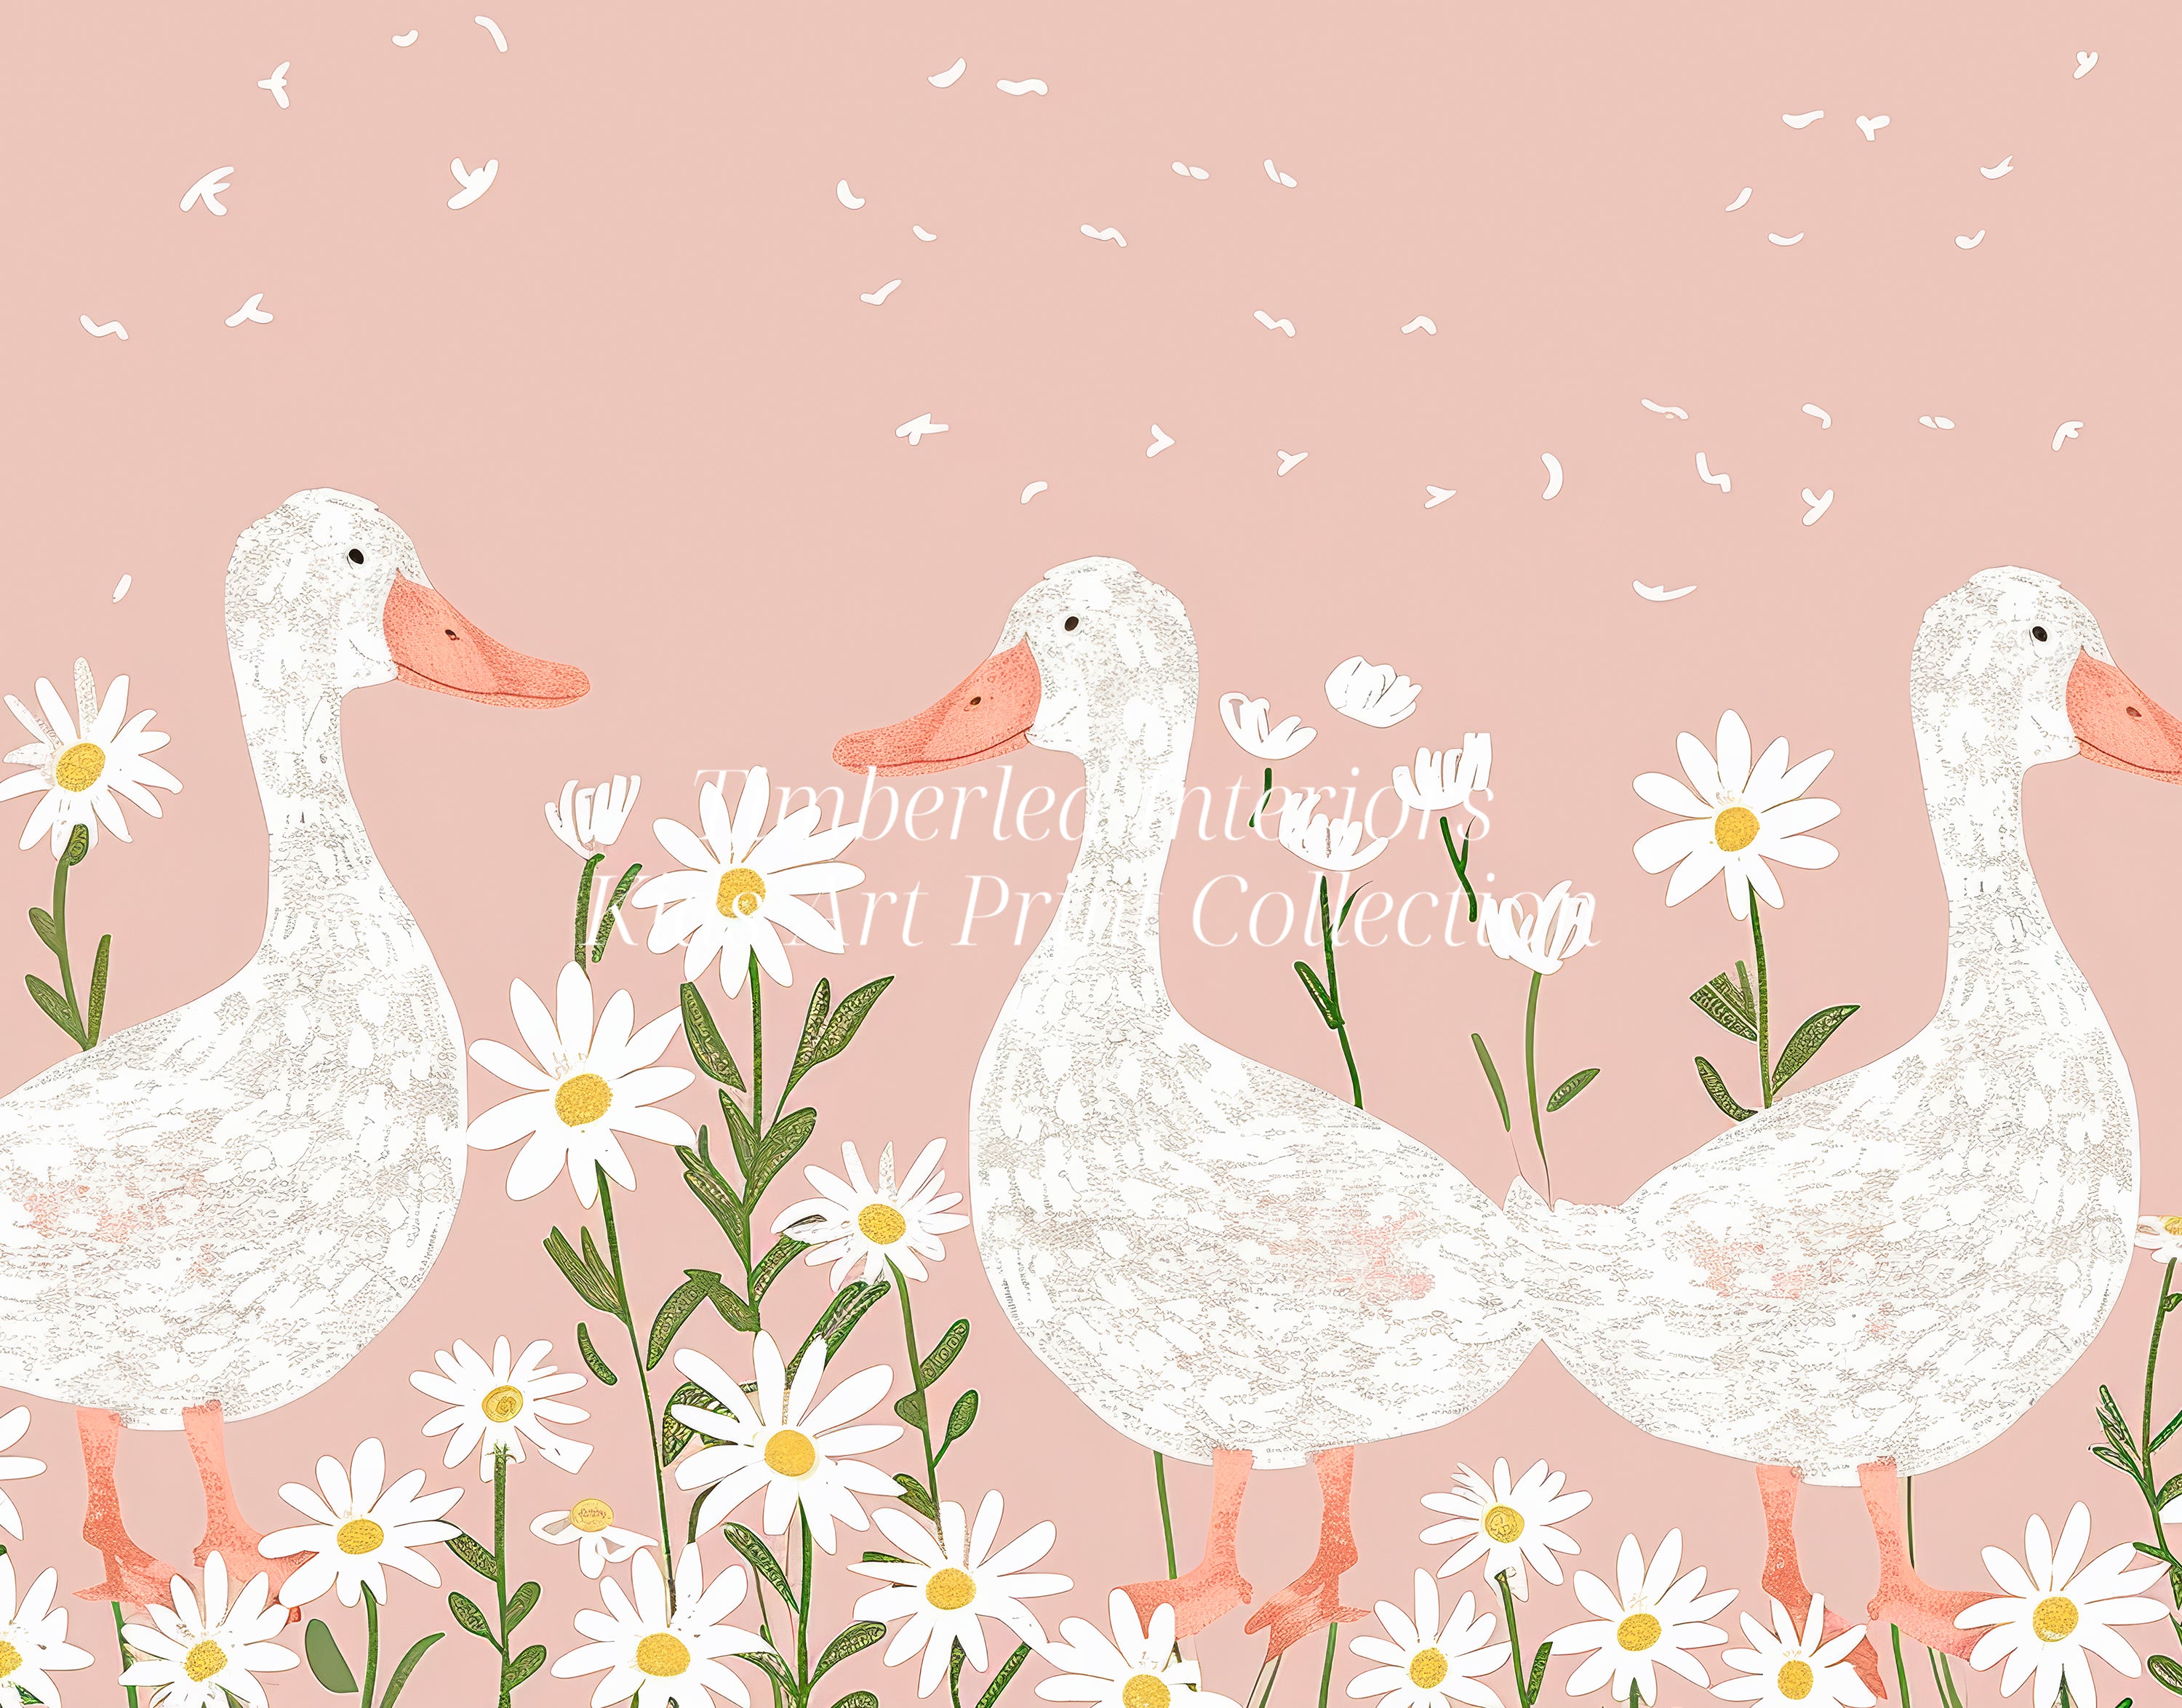 Close-up view of the Daisy Ducks Art Print featuring three adorable white ducks with orange beaks and feet standing amidst cheerful white daisies on a soft pink background.